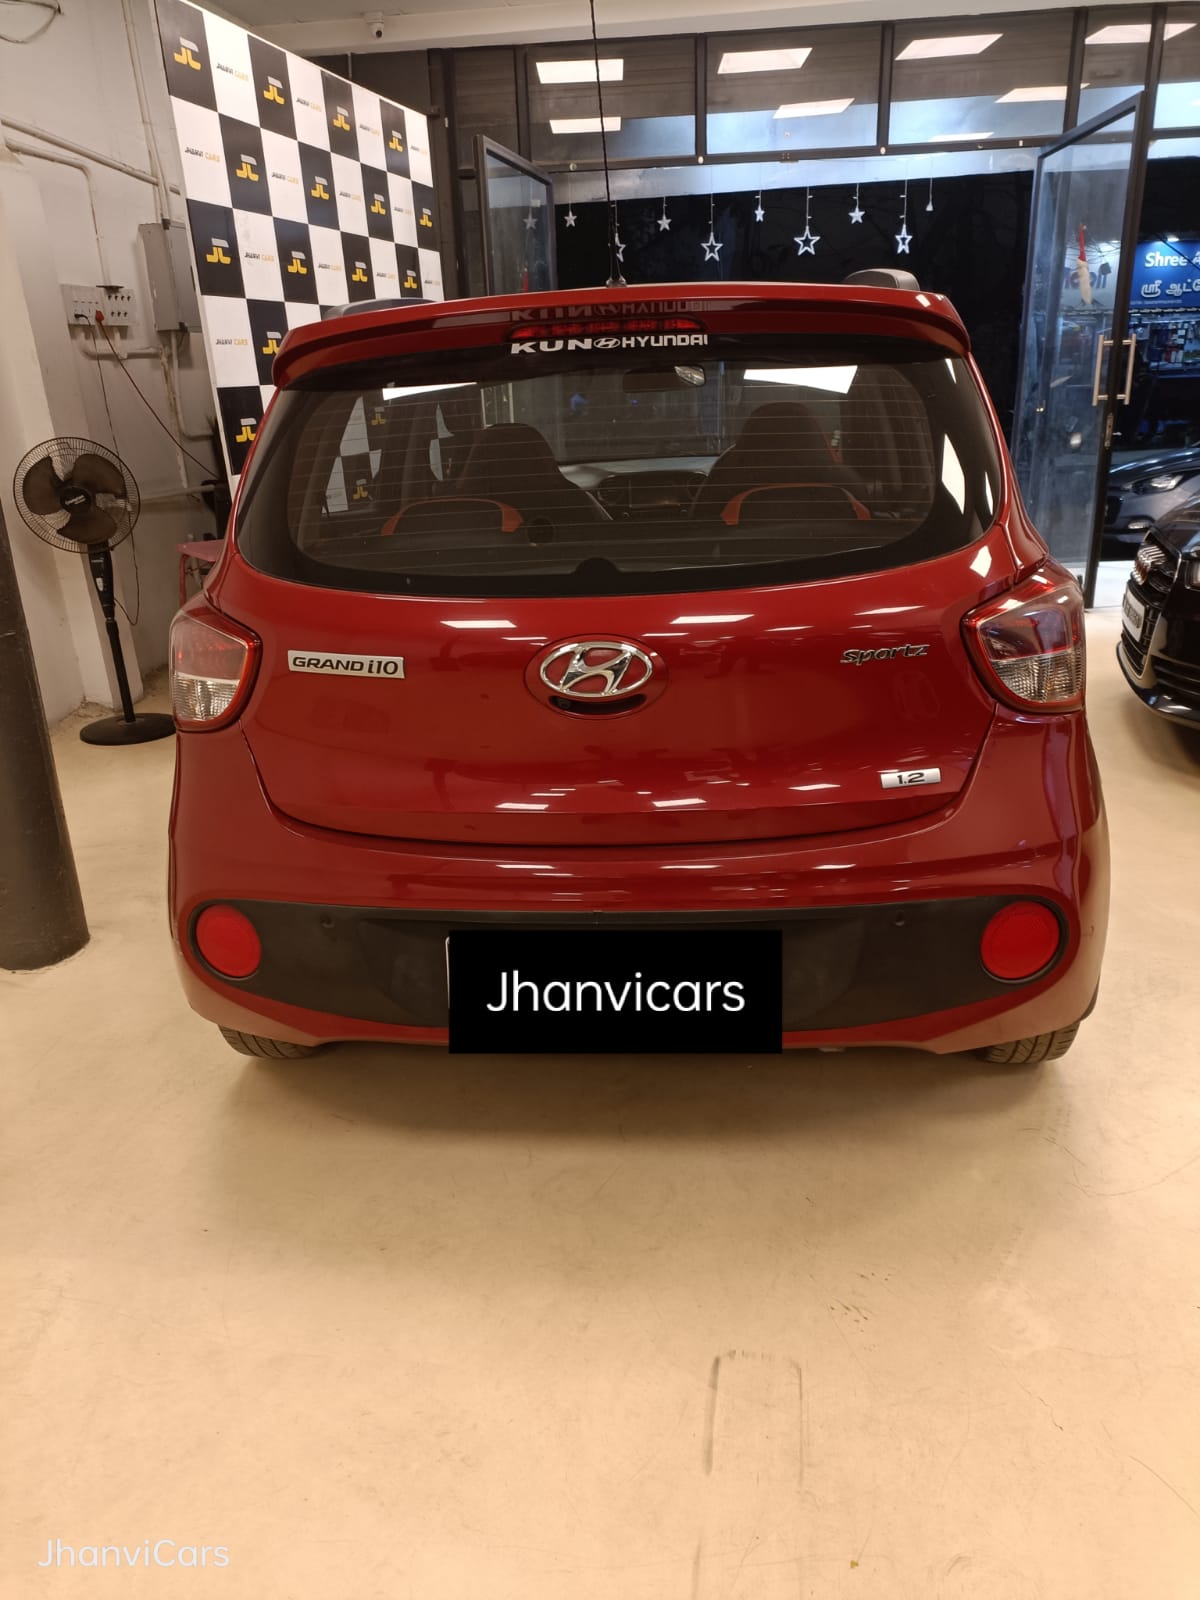 5800-for-sale-Hyundai-Grand-i10-Petrol-First-Owner-2019-TN-registered-rs-0